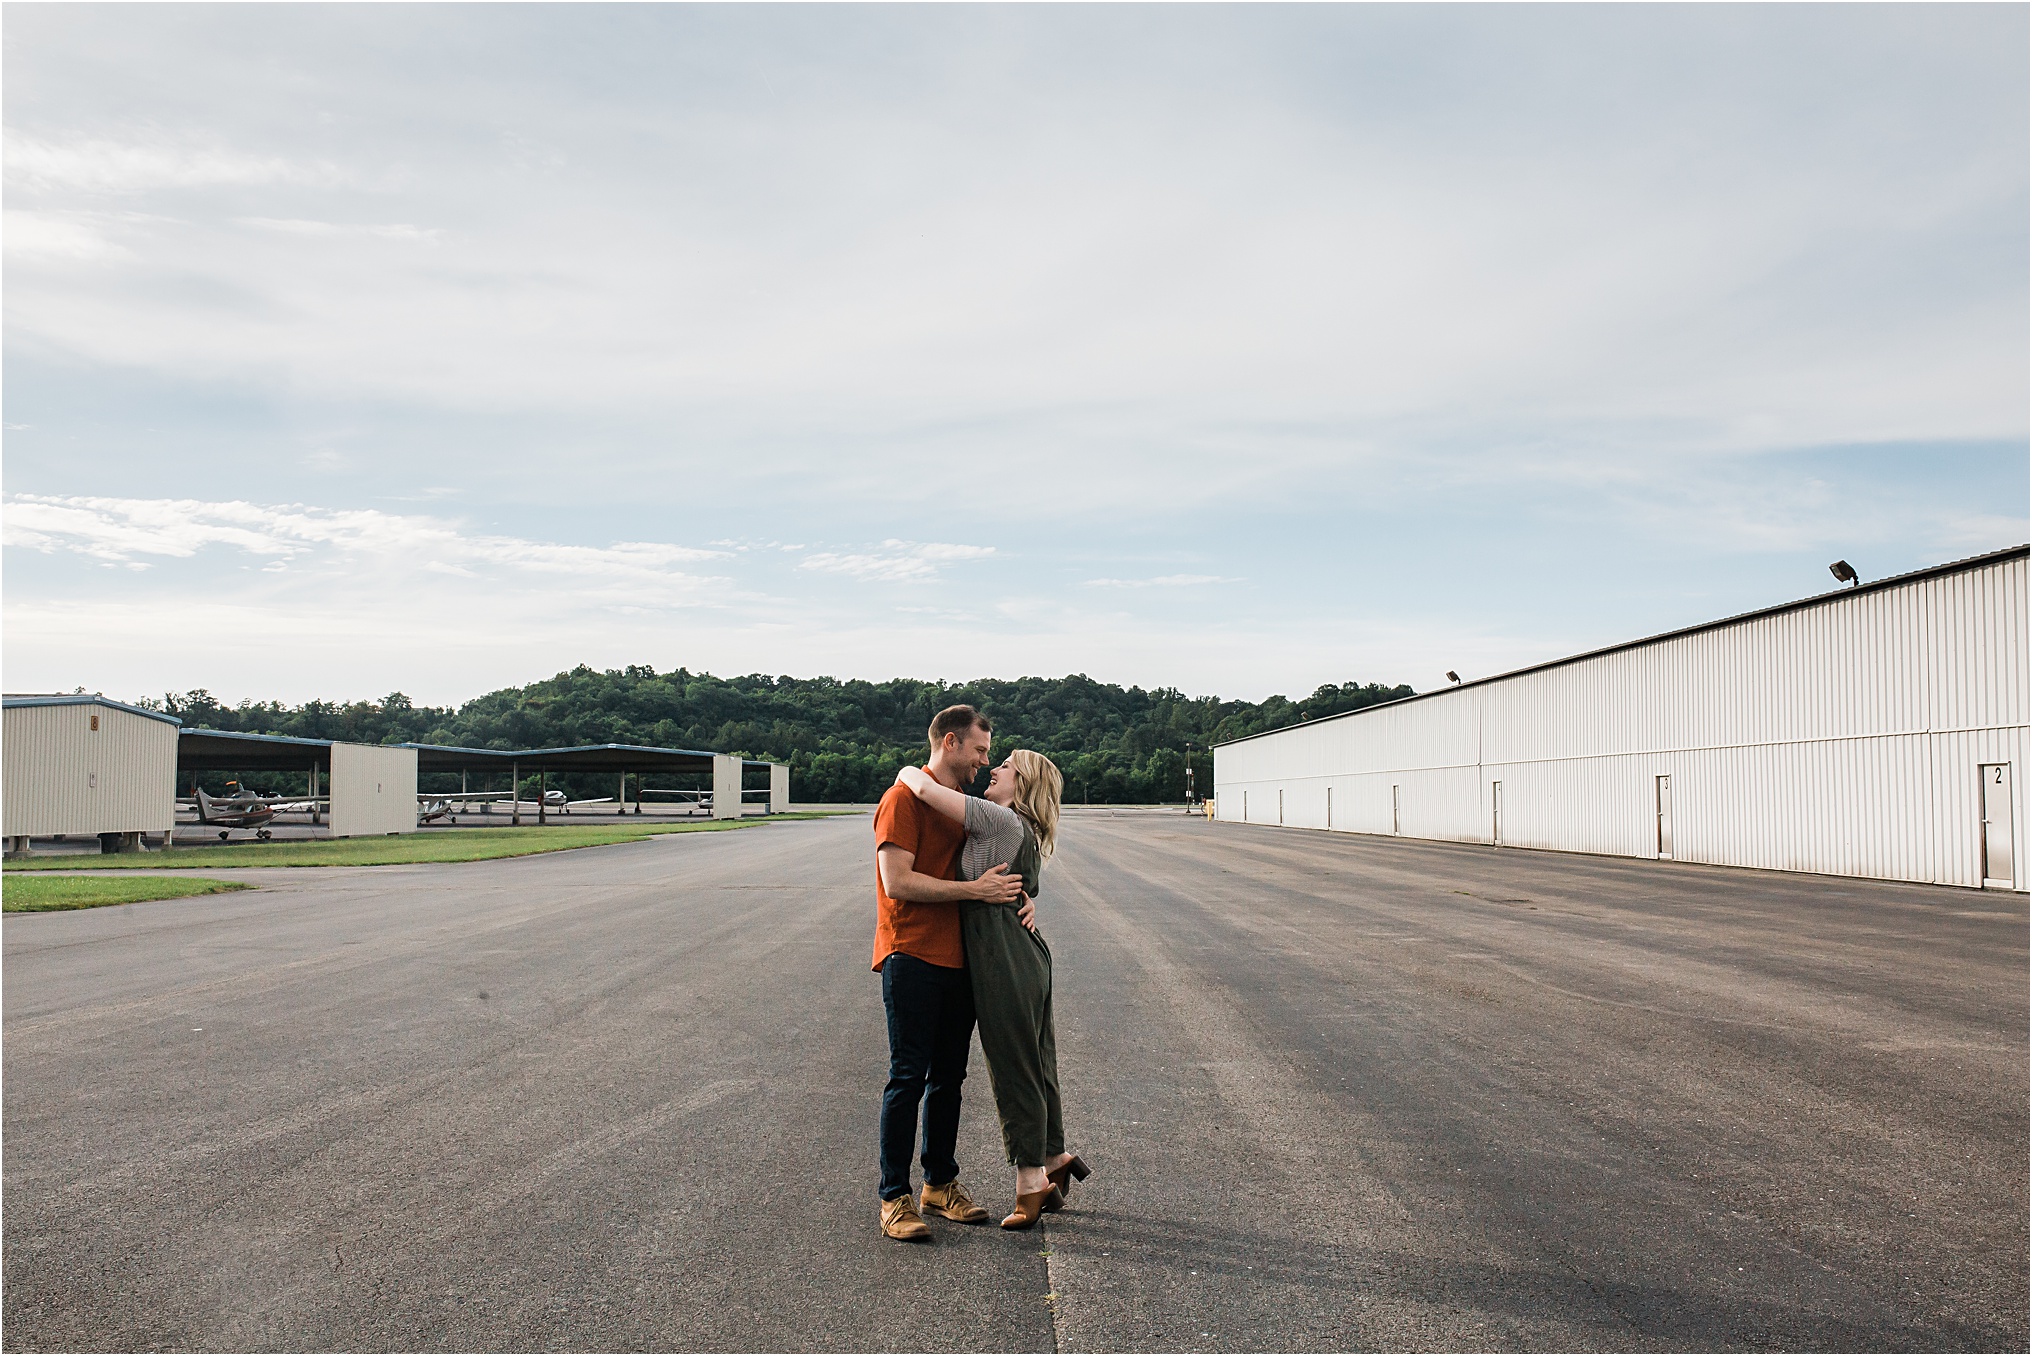 Airplane Engagement,Airport Engagement,Amber Lowe Photo,Americana,Antiques,Engagement Photo Ideas,Ford 100,Island Home Airport,Knoxville Wedding Photographer,Summer Engagement Photos,Summertime Engagement,